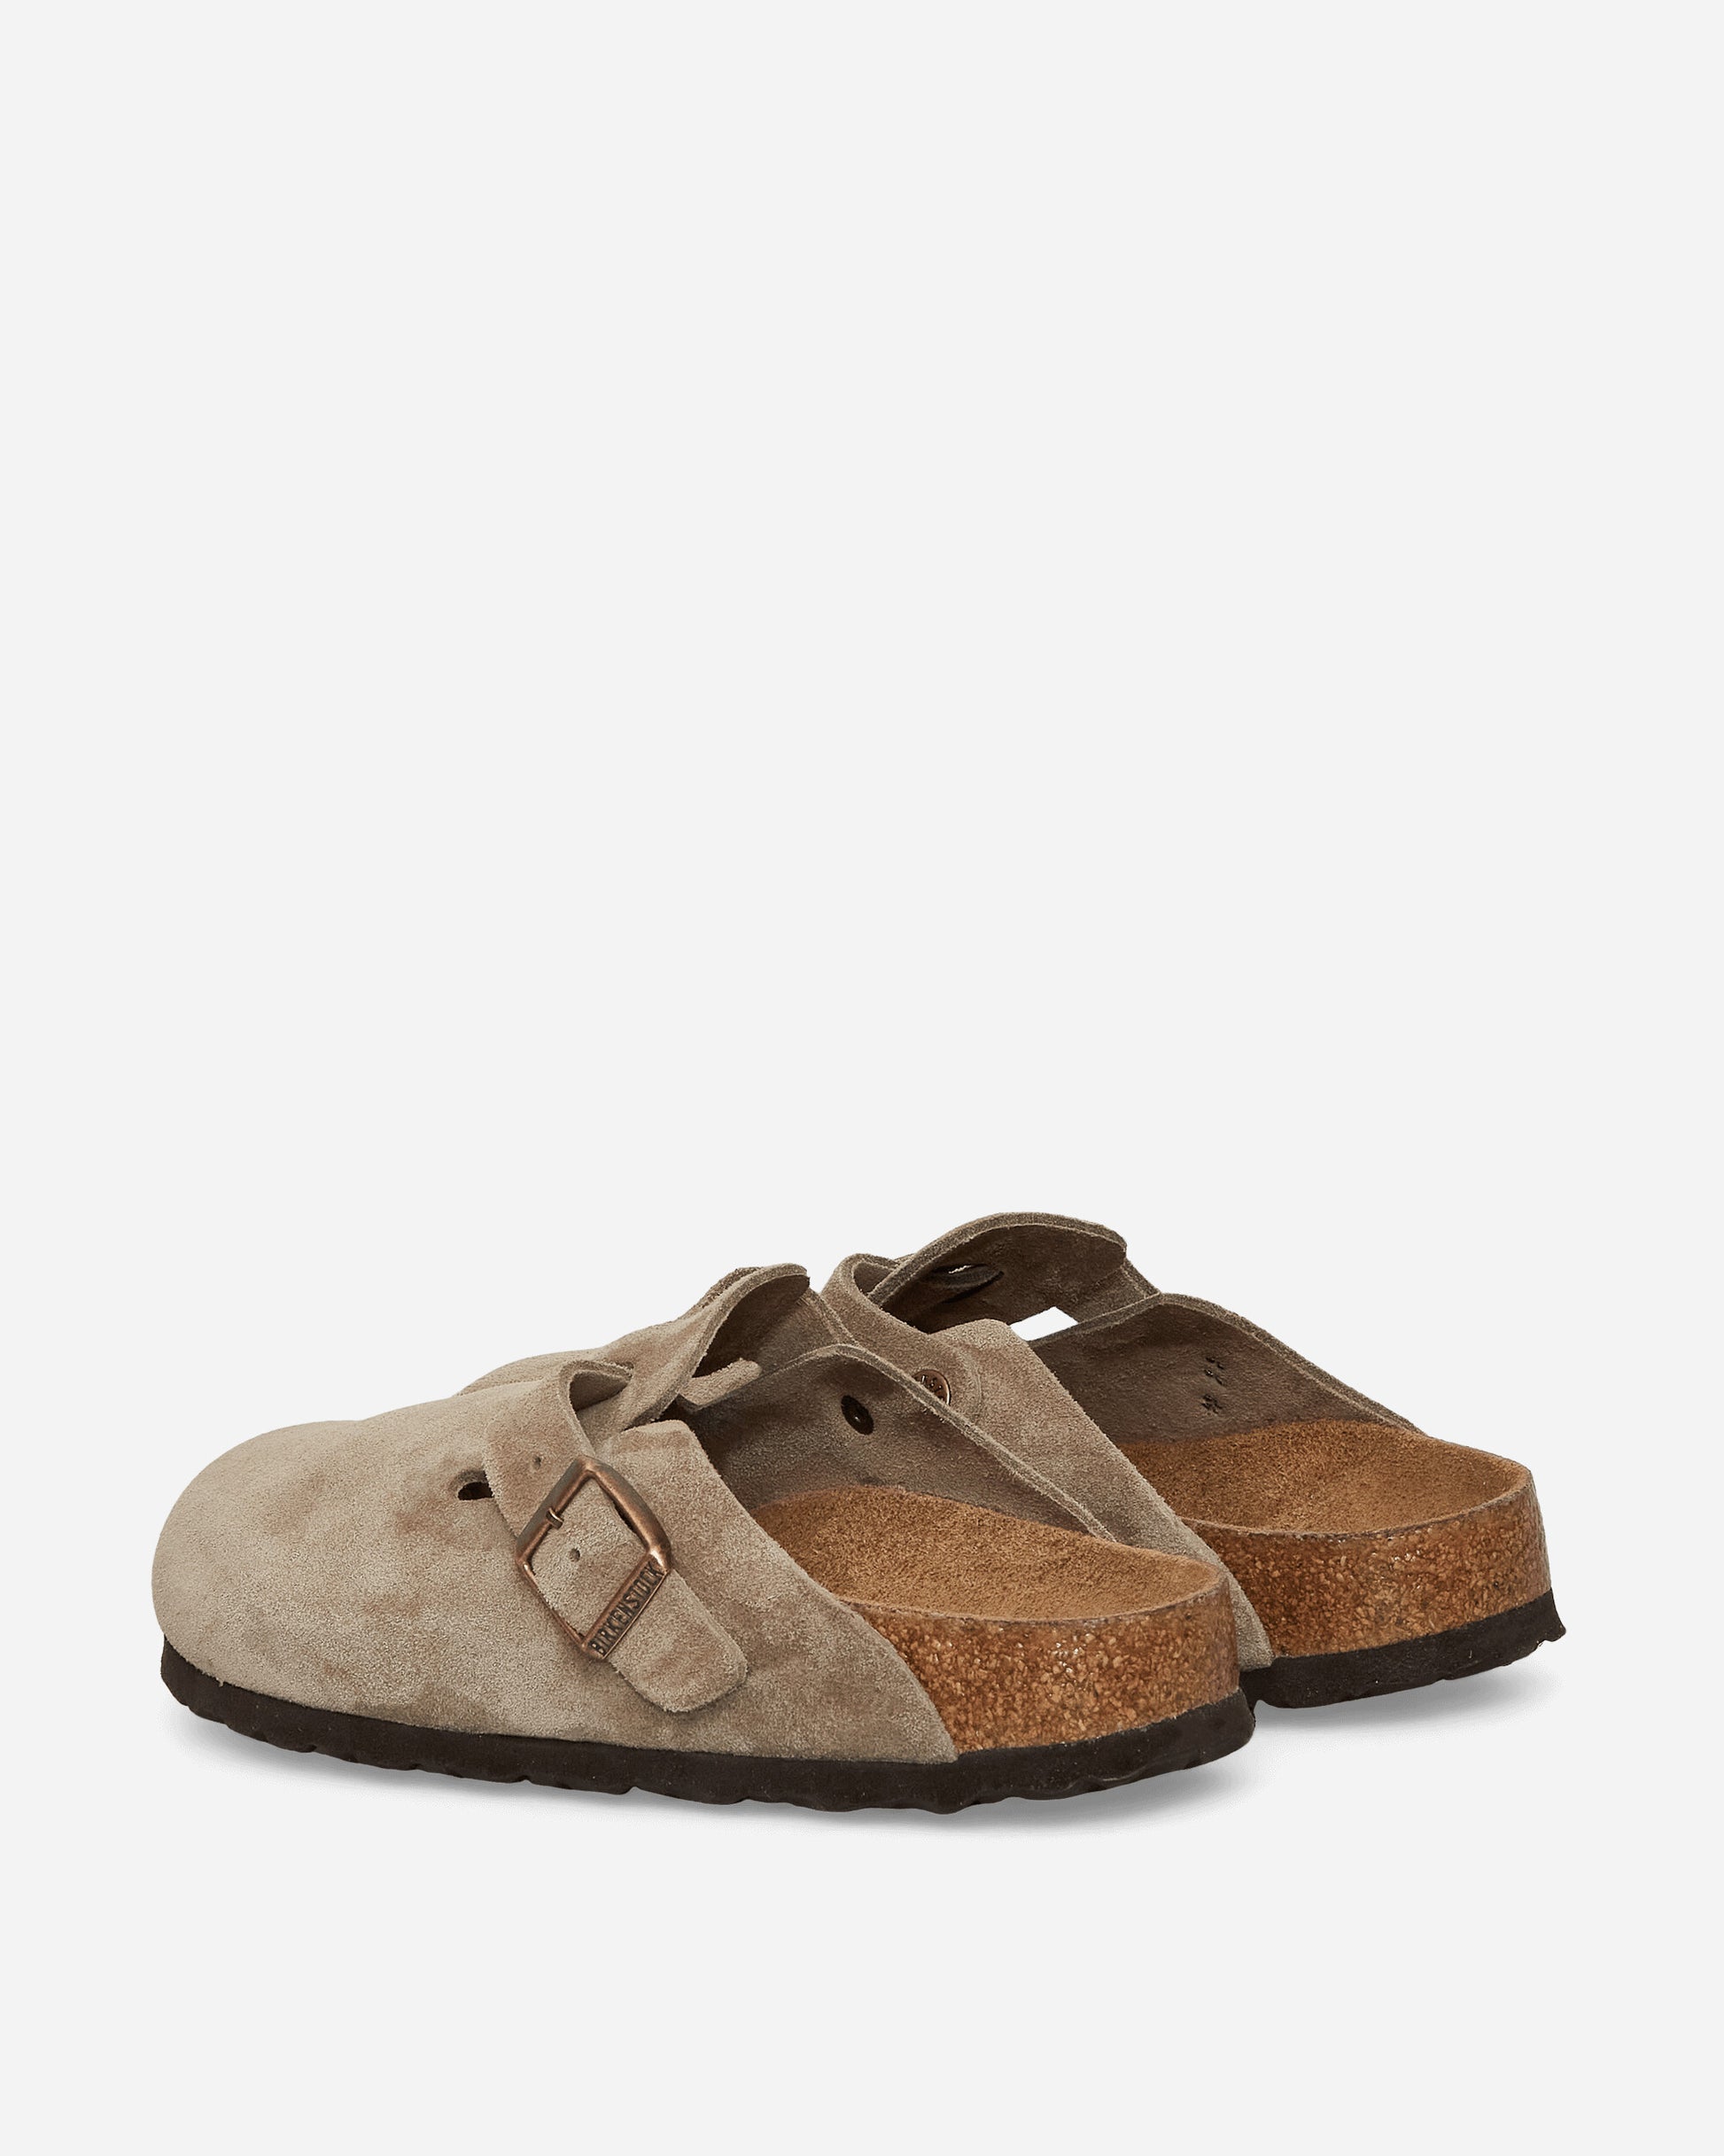 Birkenstock Boston Taupe Sandals and Slides Sandals and Mules 060463 TAUPE